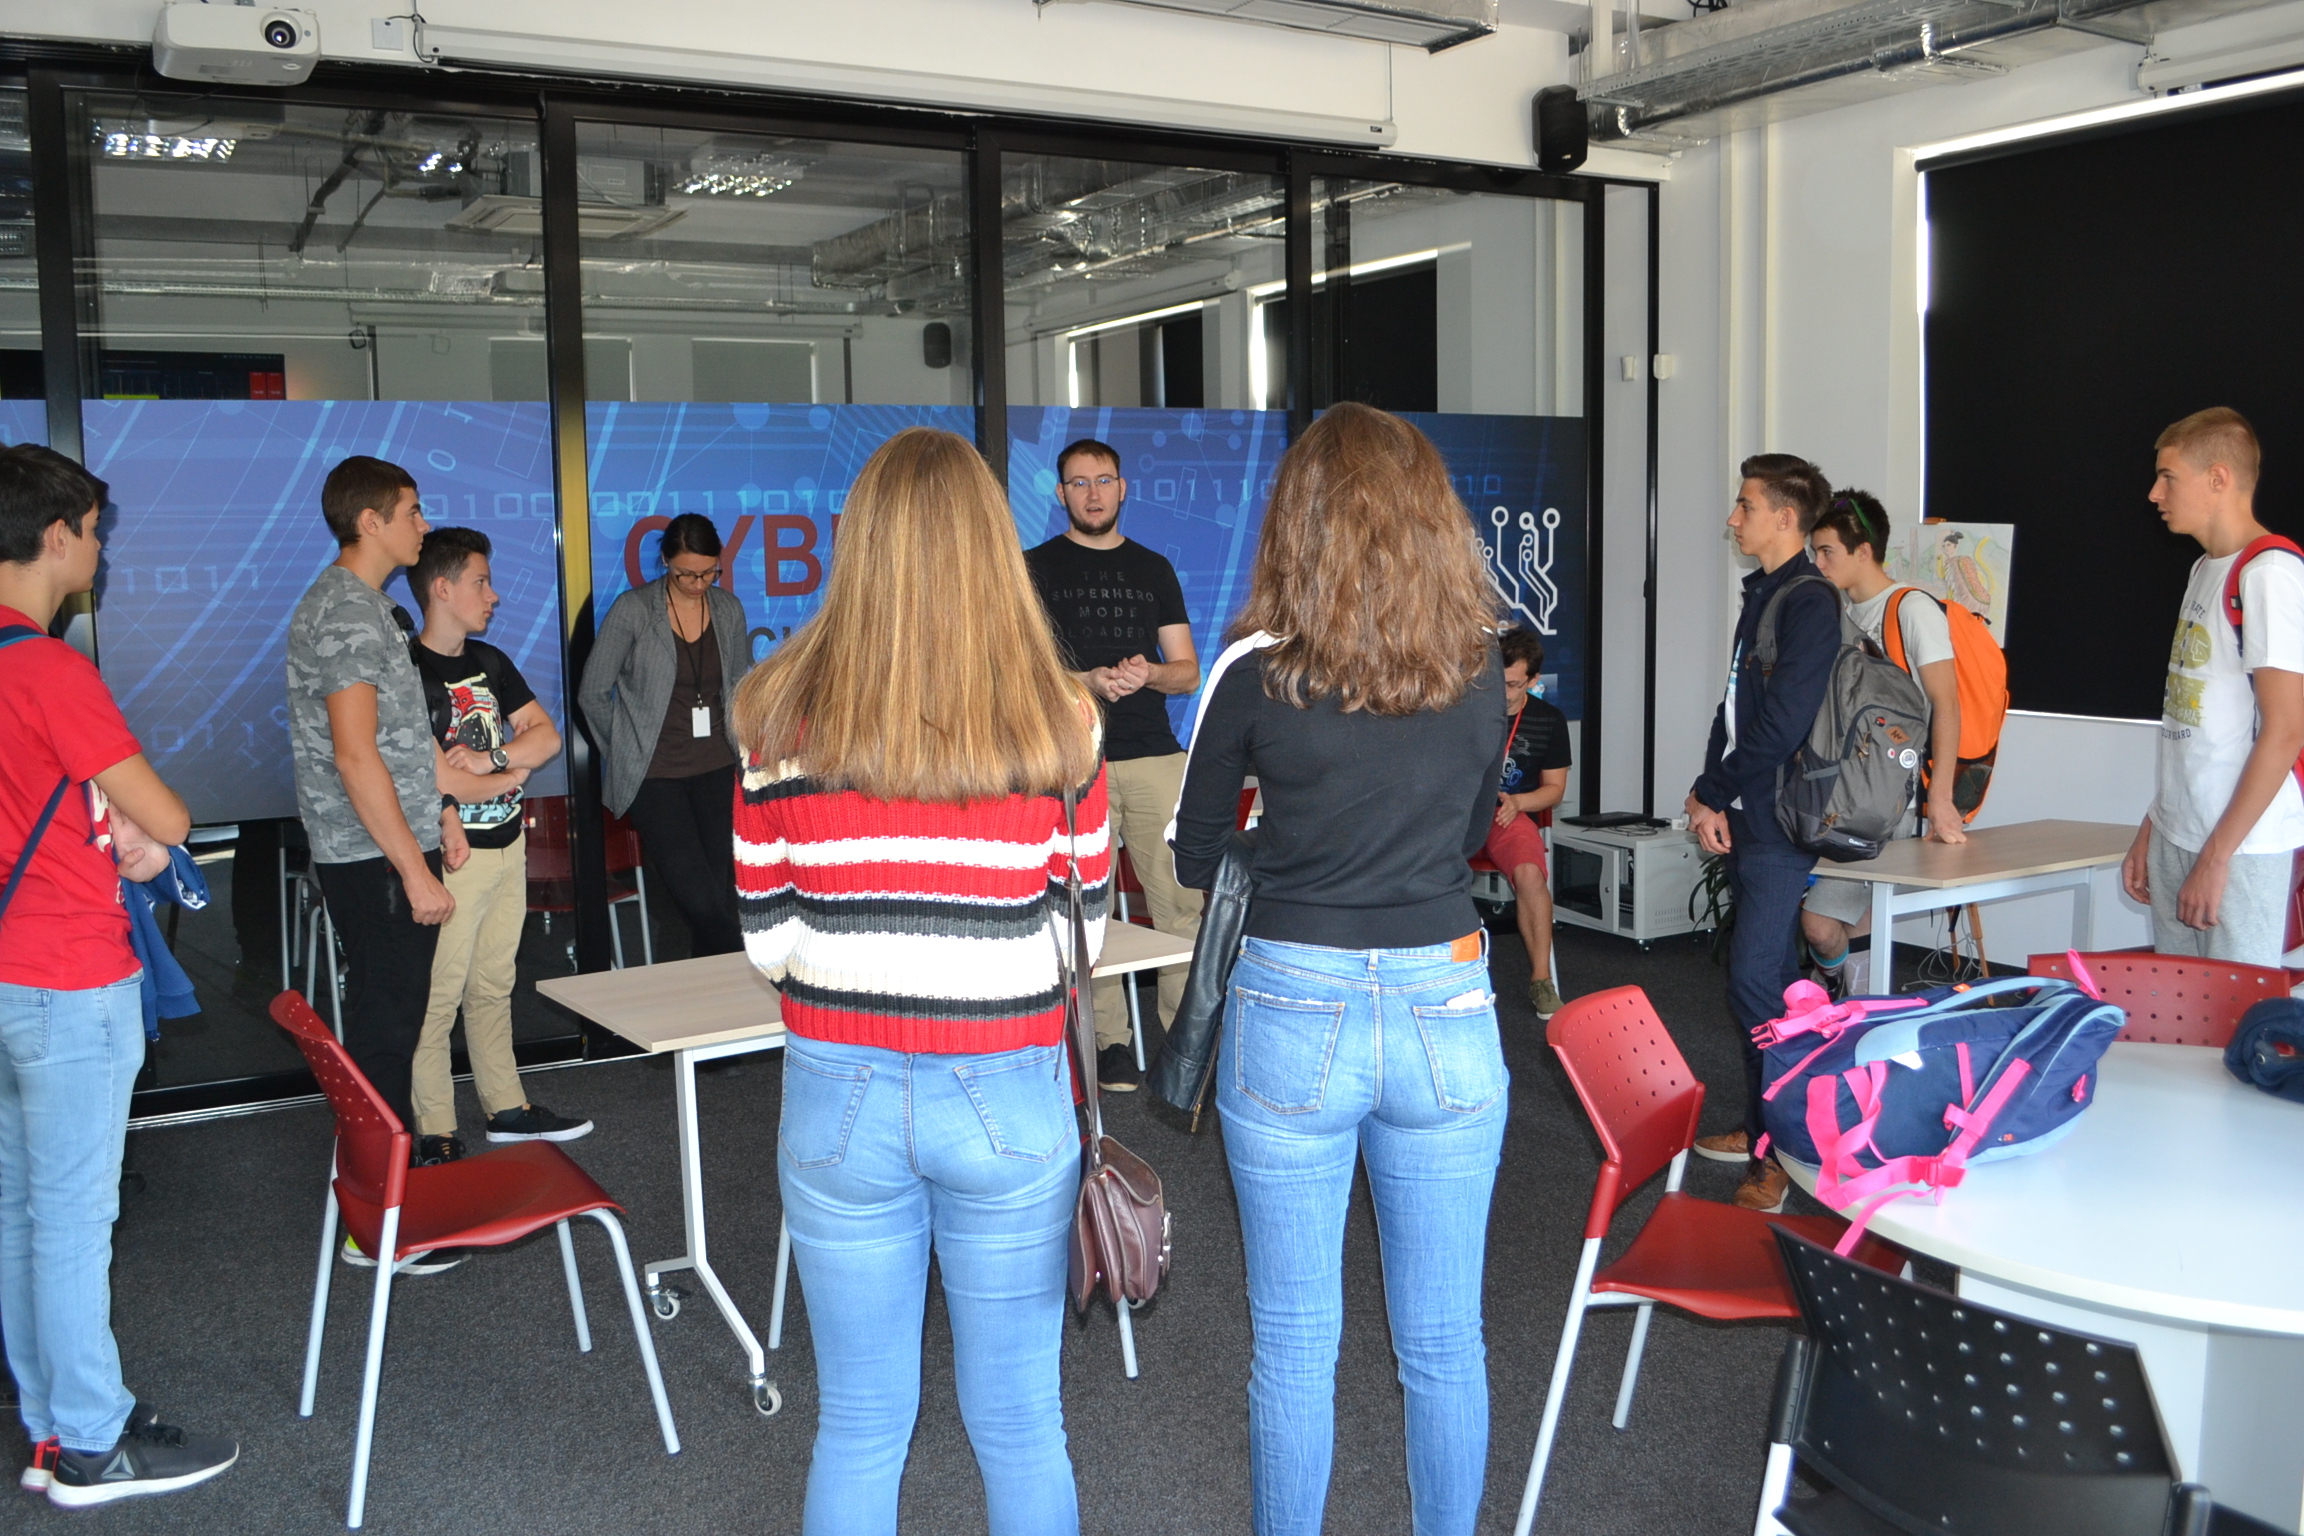 125th High School in Sofia visits the Cybersecurity Lab at Sofia Tech Park